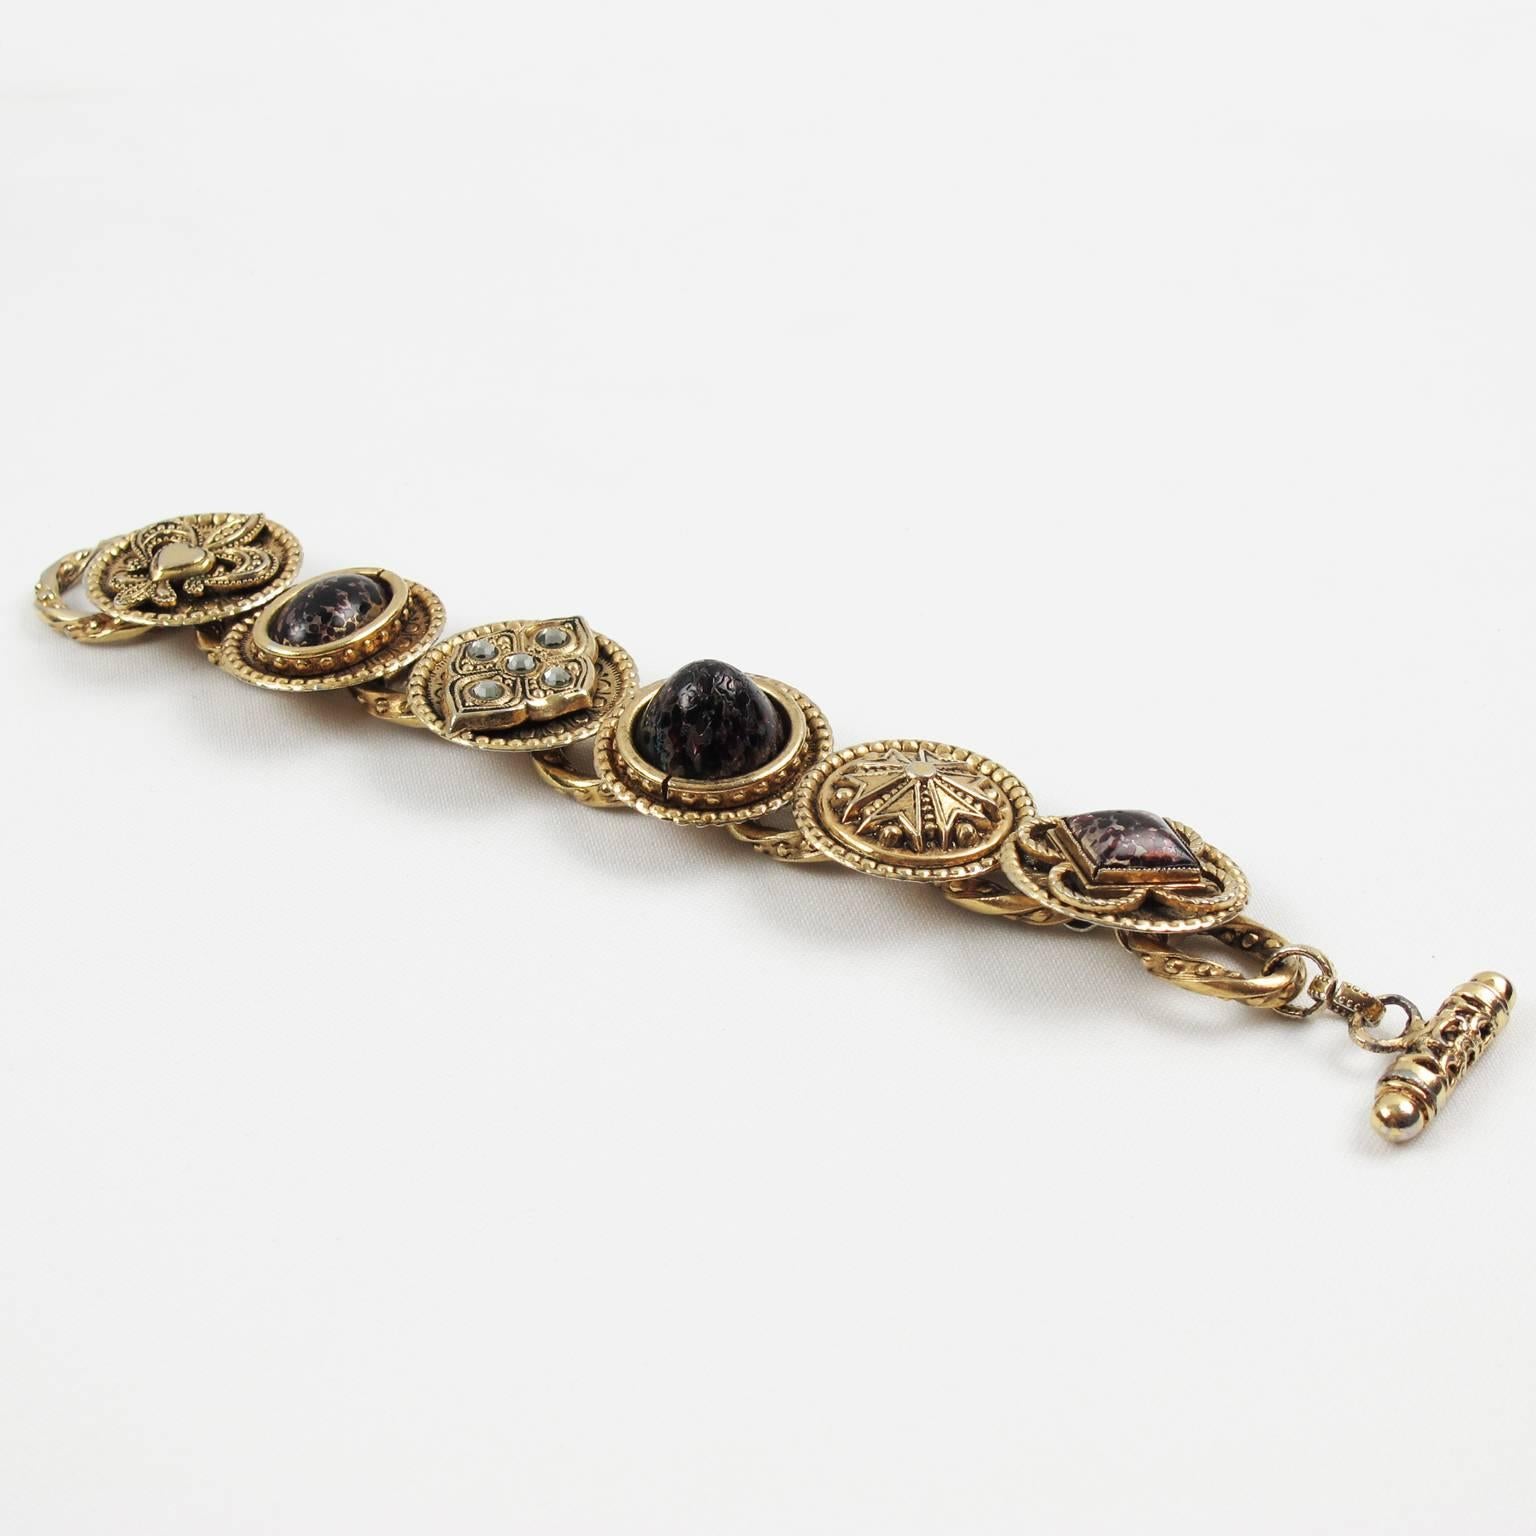 1980s rare Zoe Coste Paris Medieval link Bracelet. Heavy antique gilt metal link shape topped with textured metal coin style elements and compliment with Gripoix poured glass cabochon in unusual black and dark red marble color with pearlized